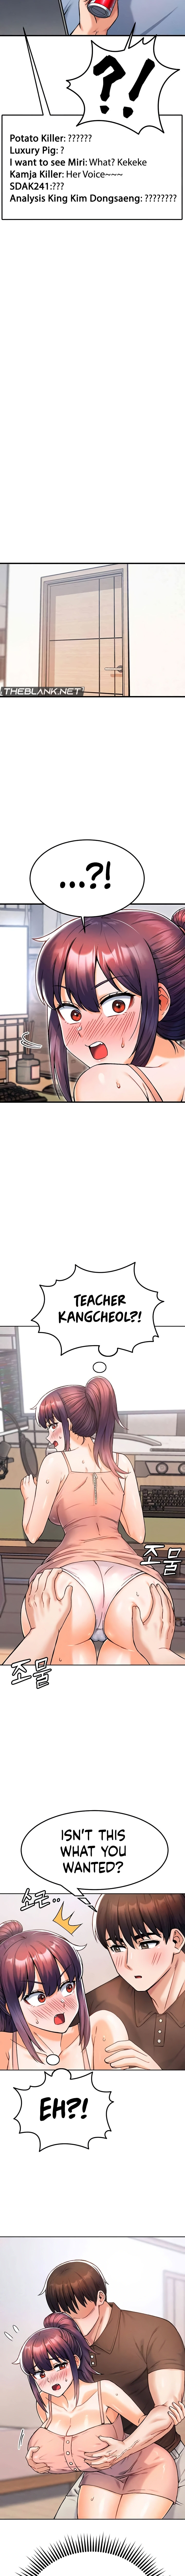 Kangcheol’s Bosses - Chapter 12 Page 13